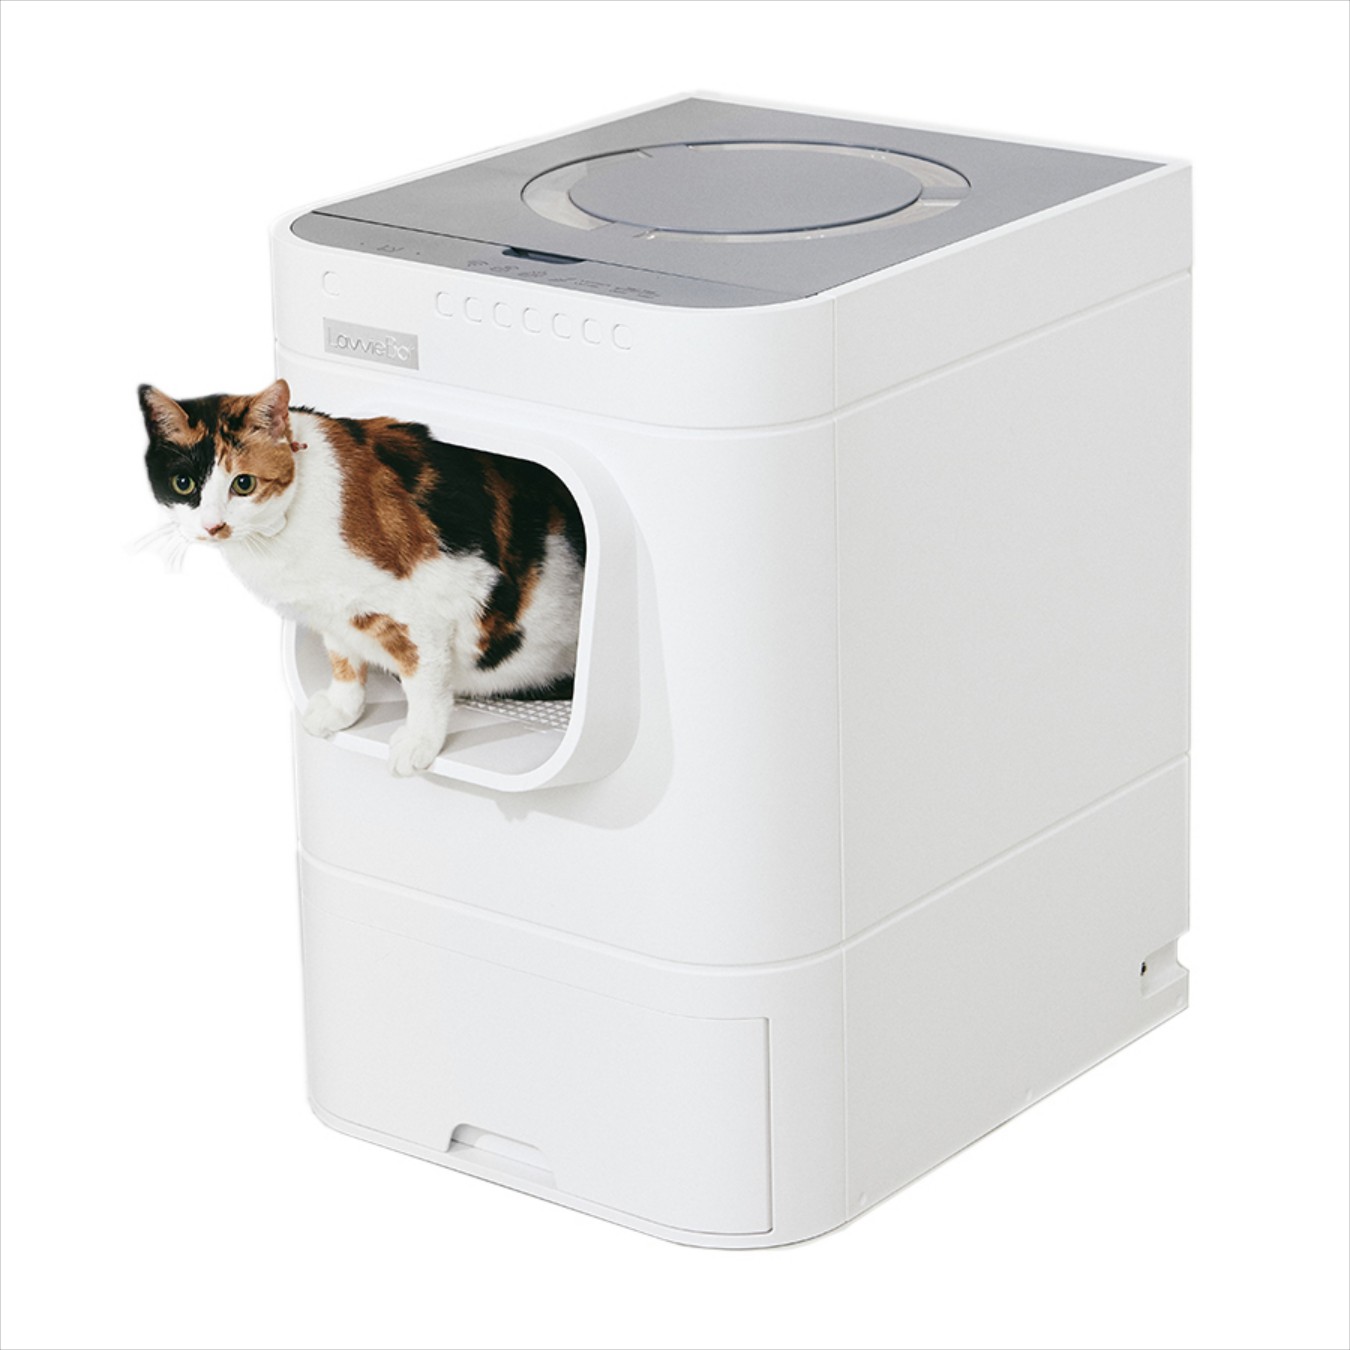 Lavviebot S Self-Cleaning Litter Box Smart Features